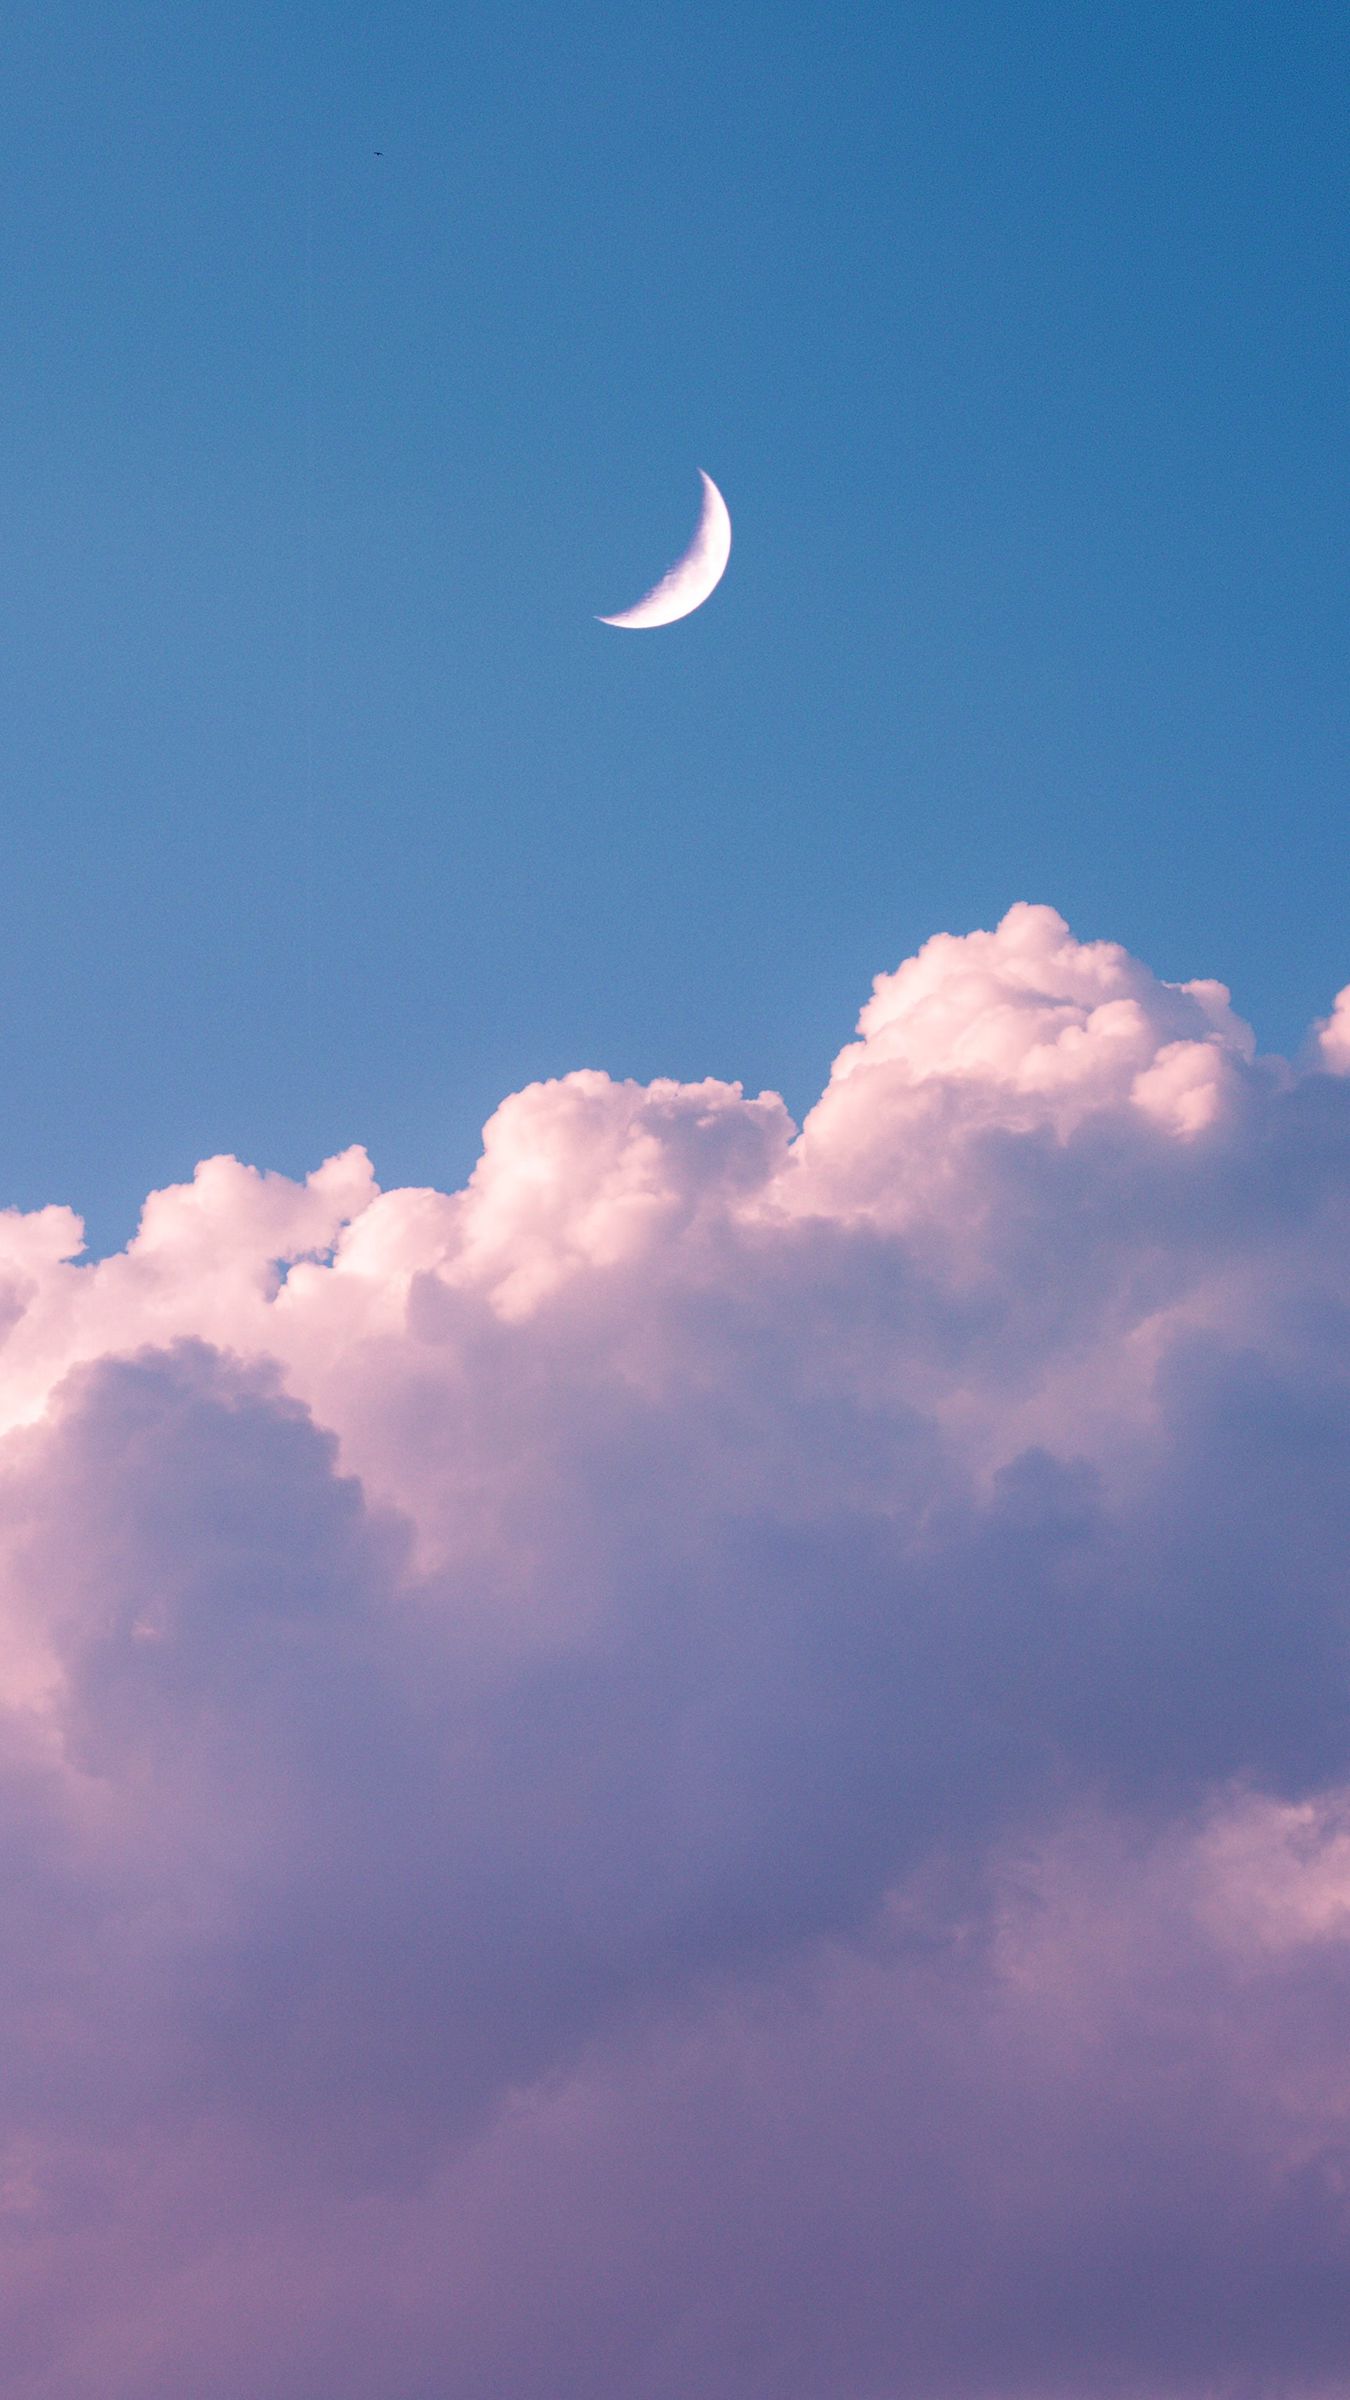 Download wallpaper 1350x2400 cloud, moon, sky iphone 8+/7+/6s+/6+ for  parallax hd background